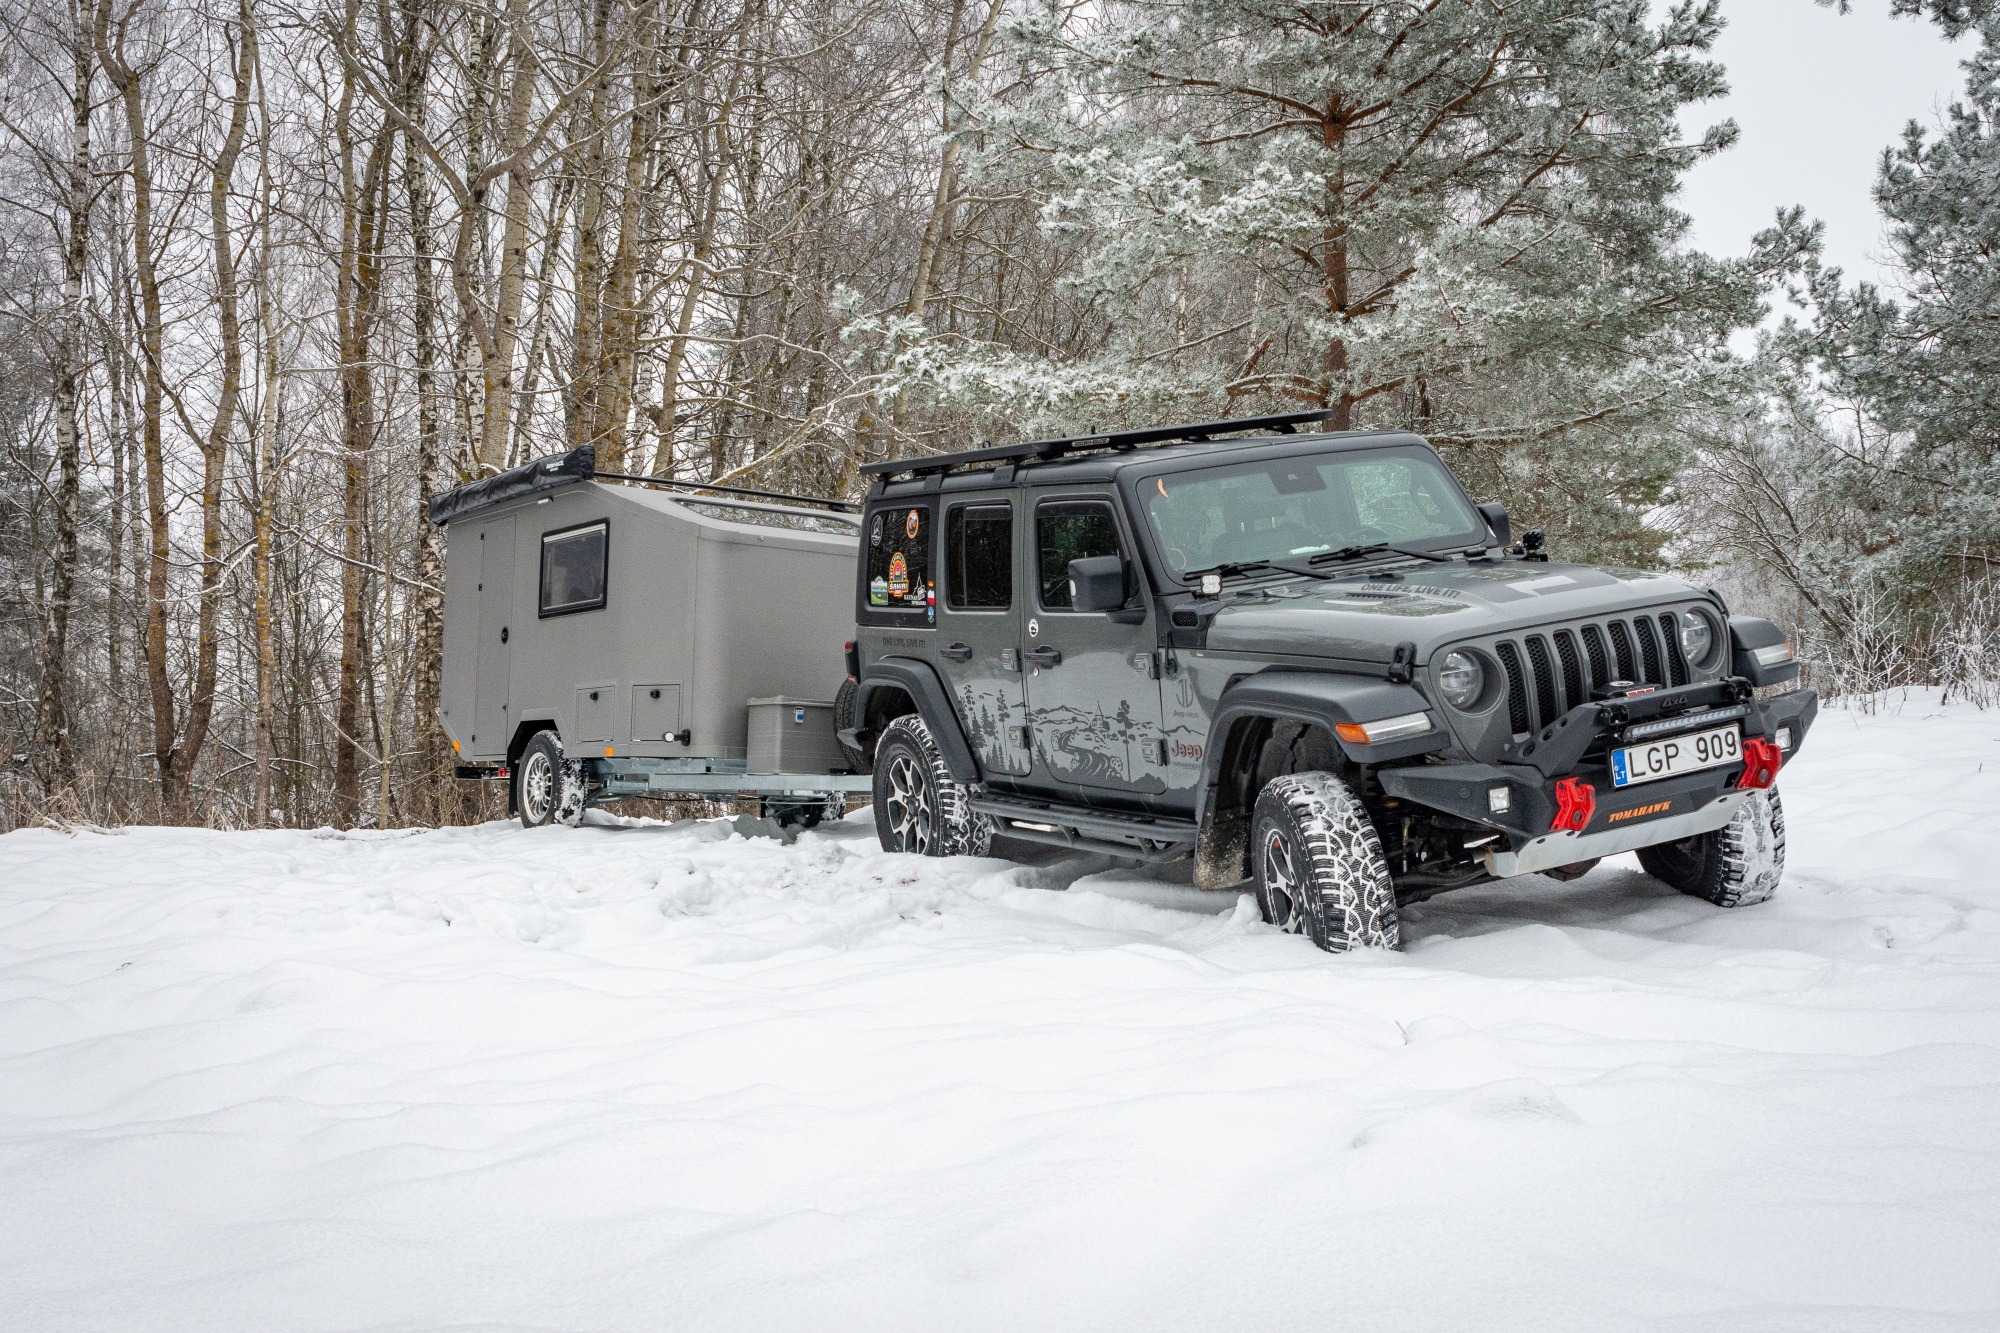 Tinycamper expedition camper with a Jeep Wrangler